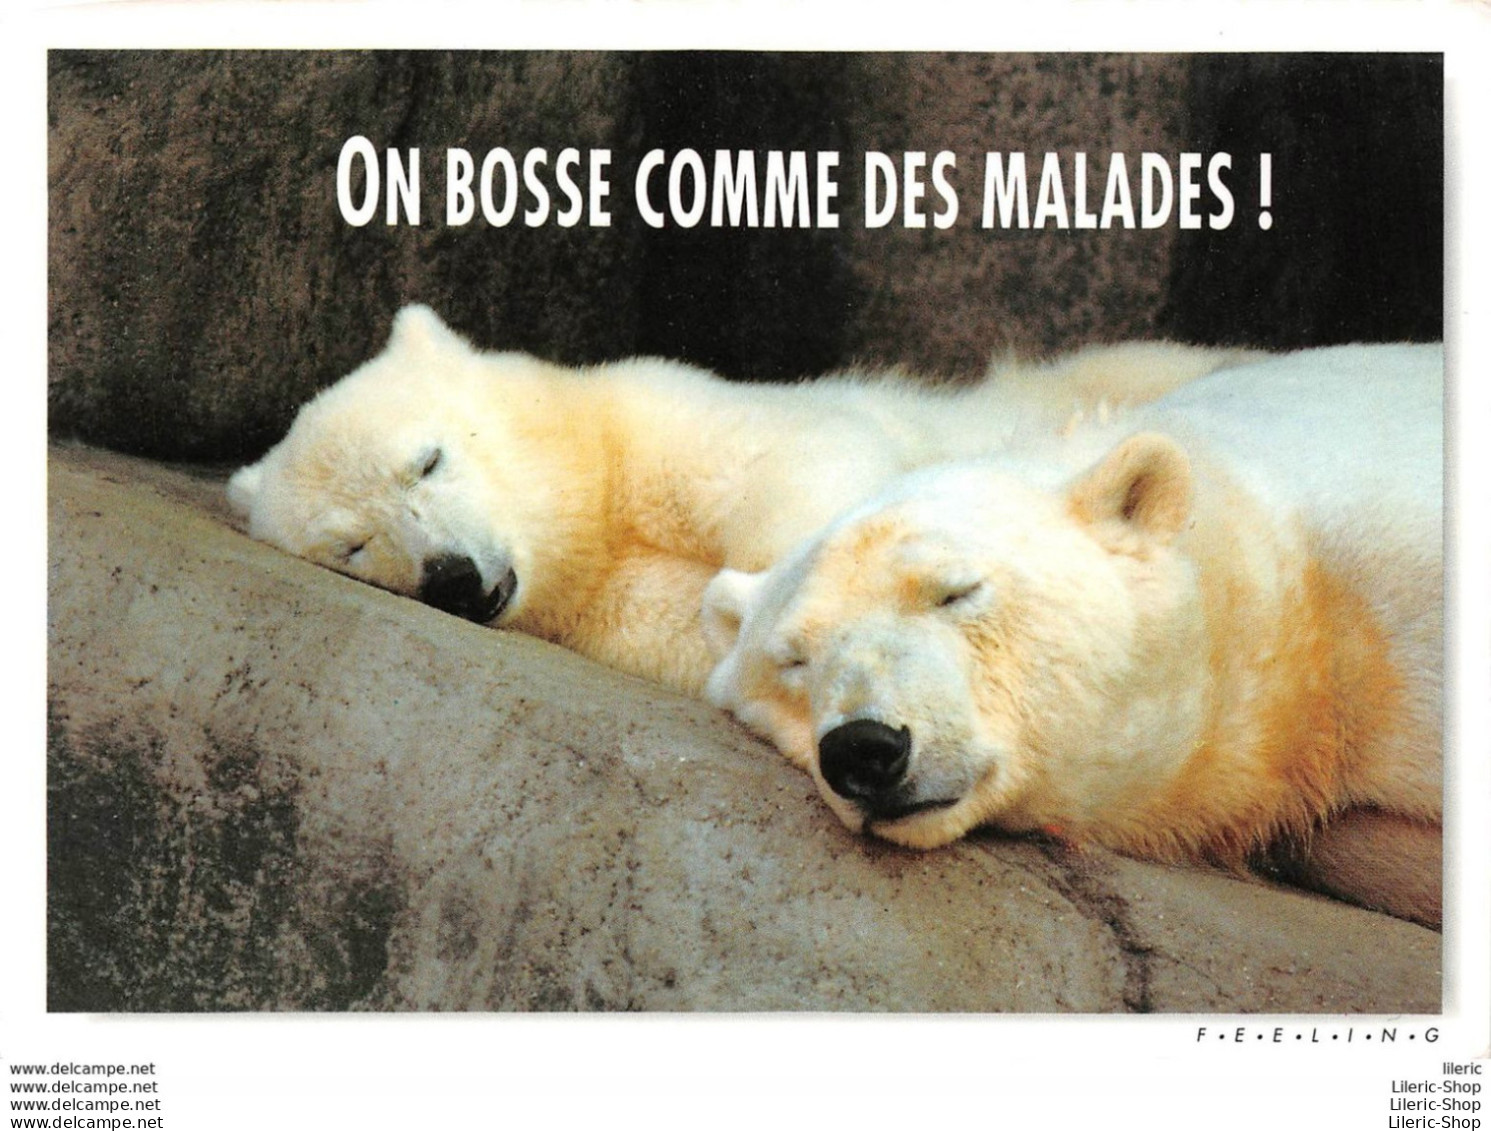 CPM HUMOUR COMIC " ON BOSSE COMME DES MALADES ! " # OURS # BEAR # BÄR # ORSO # OSO #- PHOTO ROBERT CUSHMAN HAYES - Bears